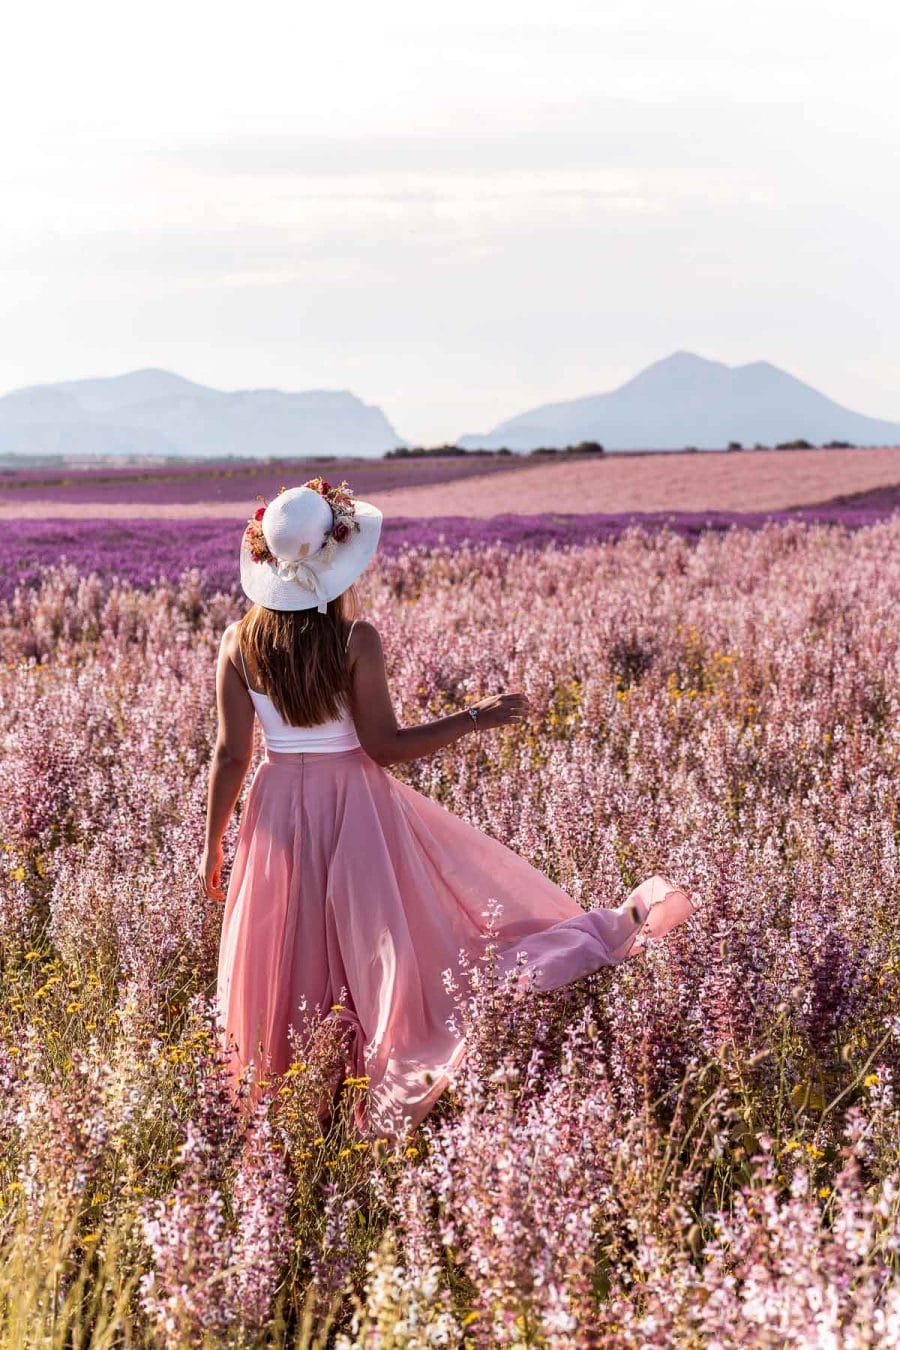 Girl in a pink skirt standing in the middle of a sage field in Provence